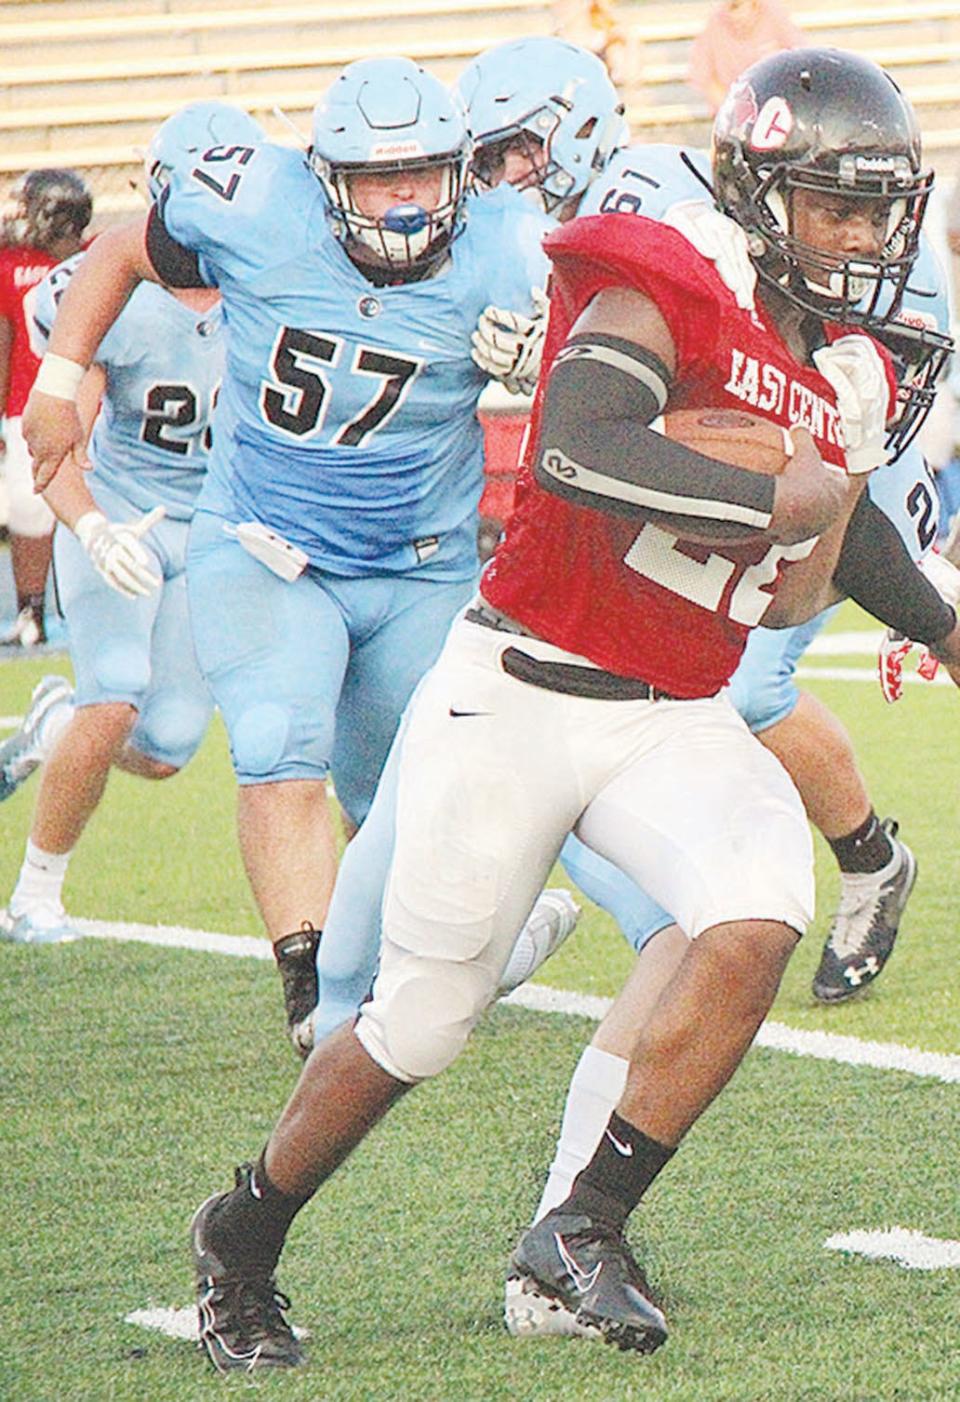 Bartlesville High School's Colton Green, left, gives heavy backside pursuit to a Tulsa East Central High School ballcarrier during Green's prep playing days.